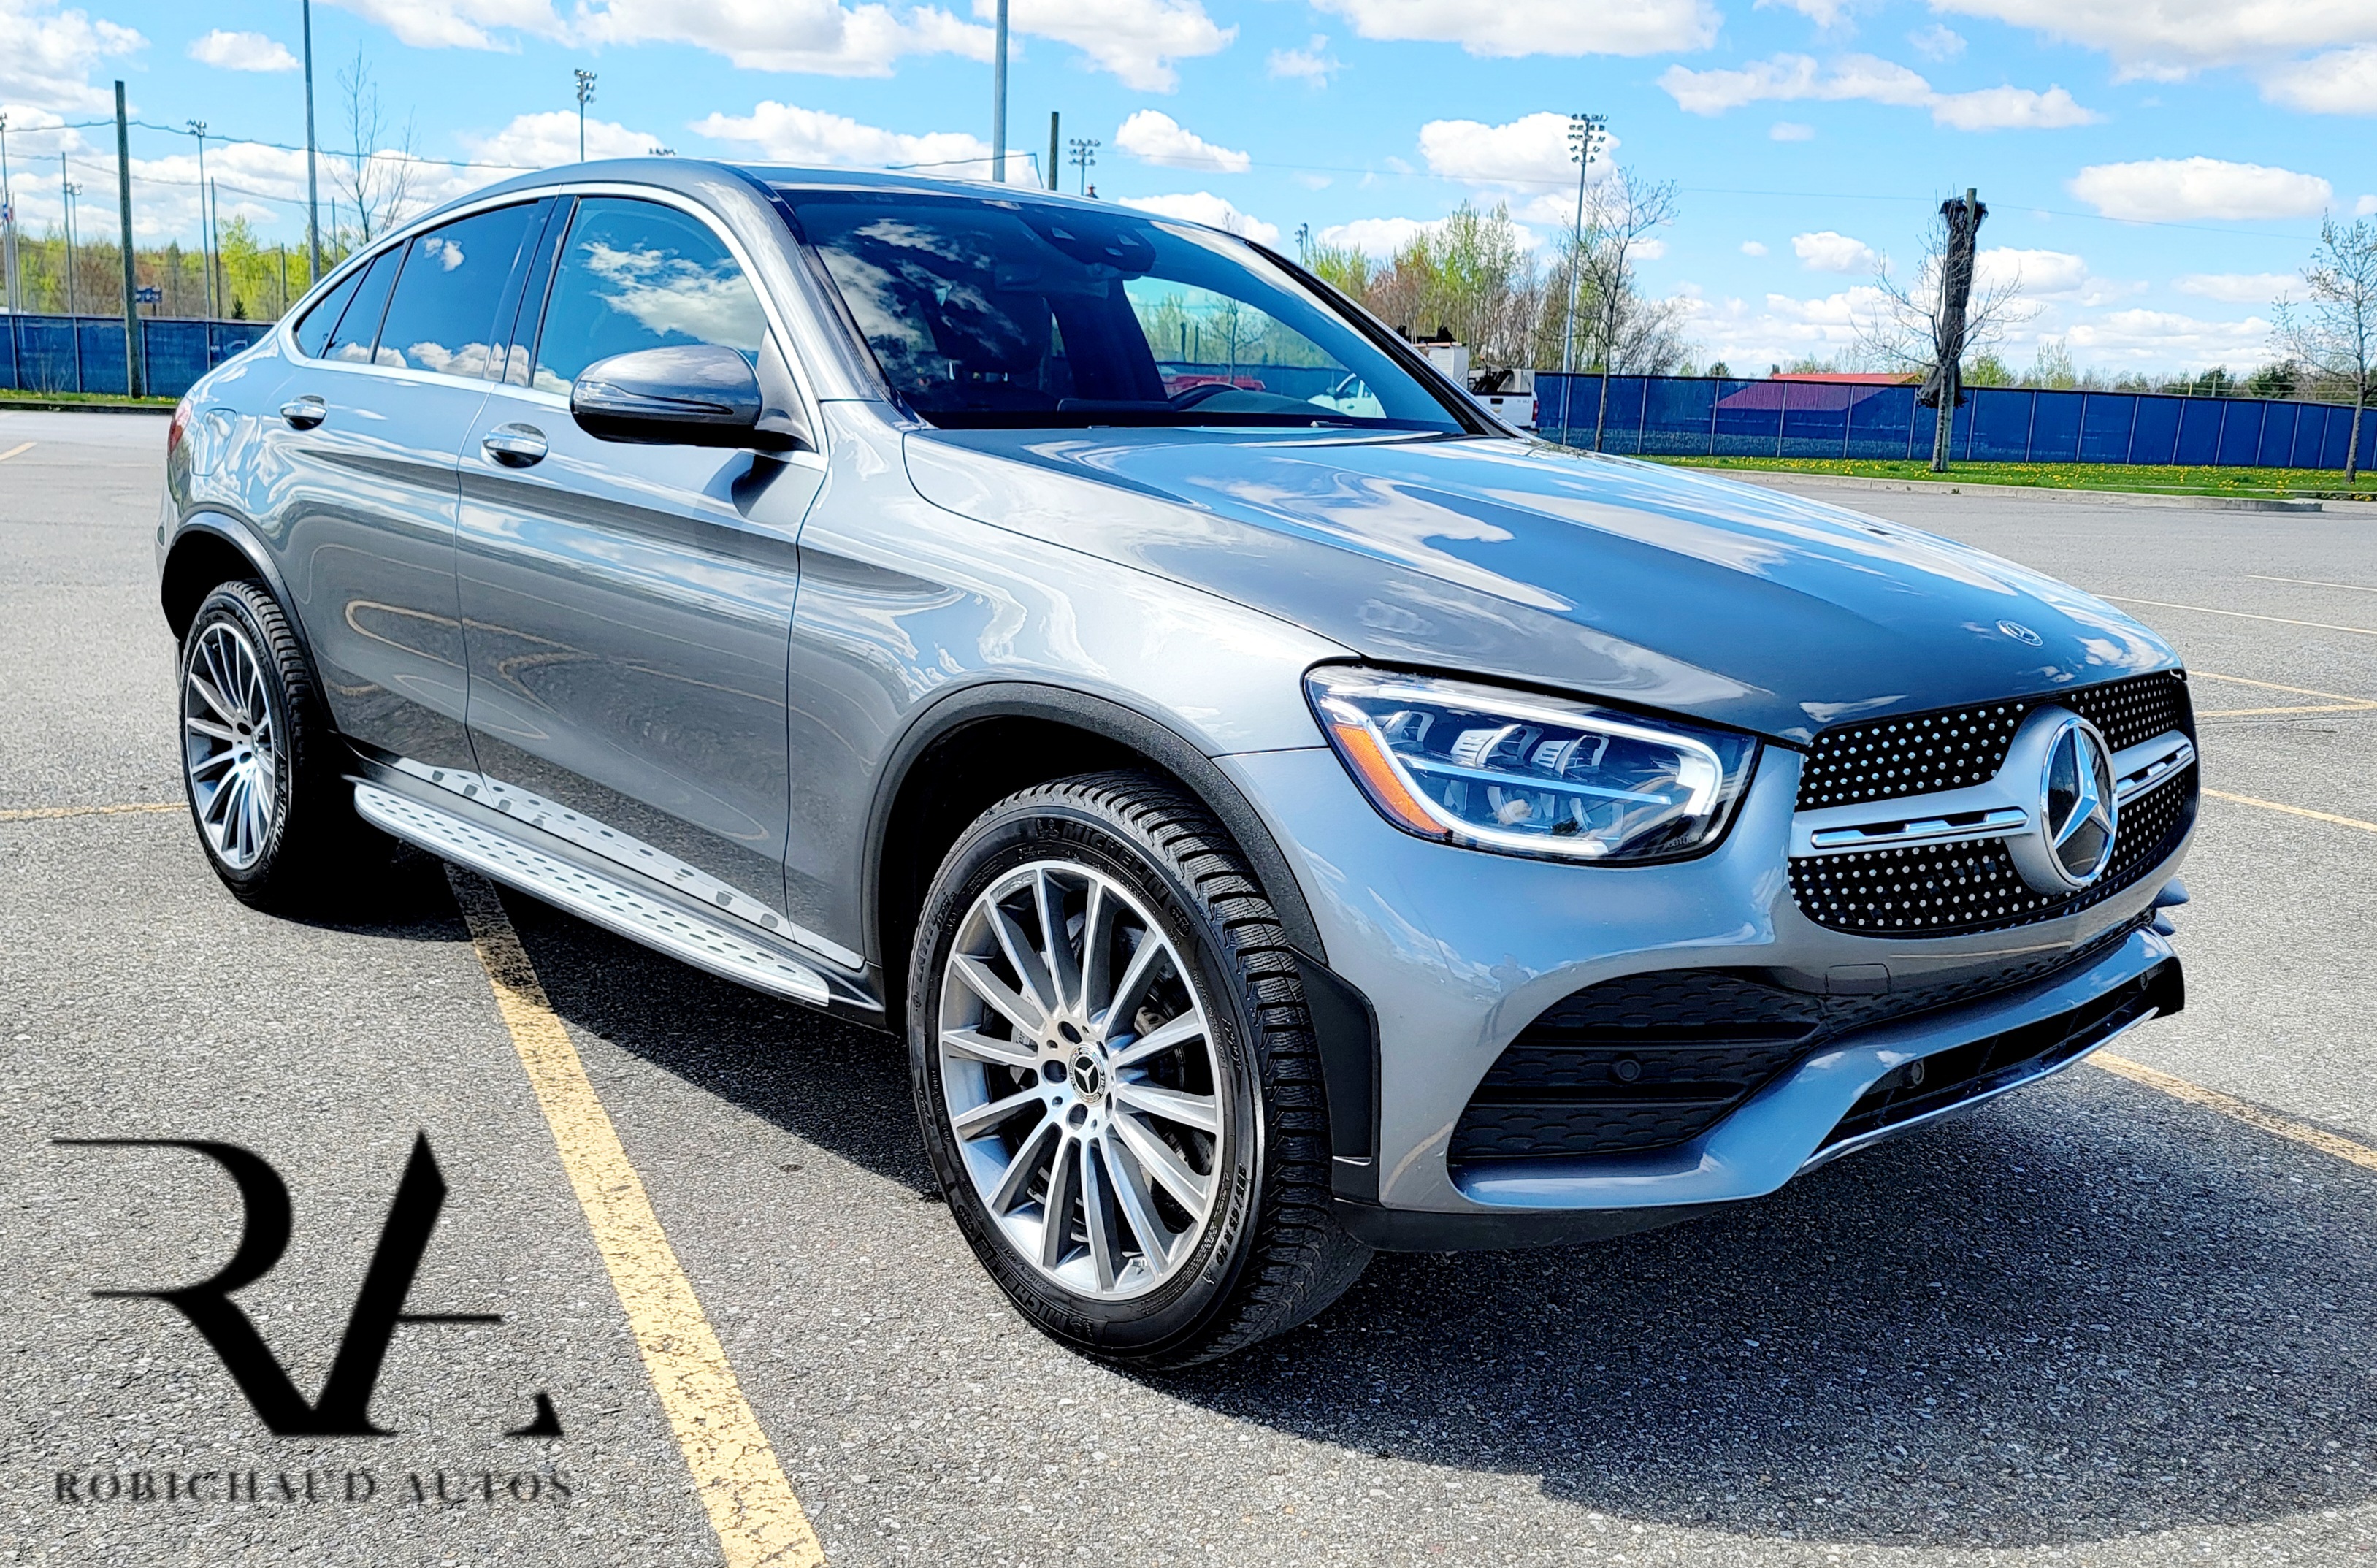 2020 Mercedes-Benz GLC *COUPE* 4 MATIC 56 728 KM CUIR ROUGE TOIT OUVRANT 